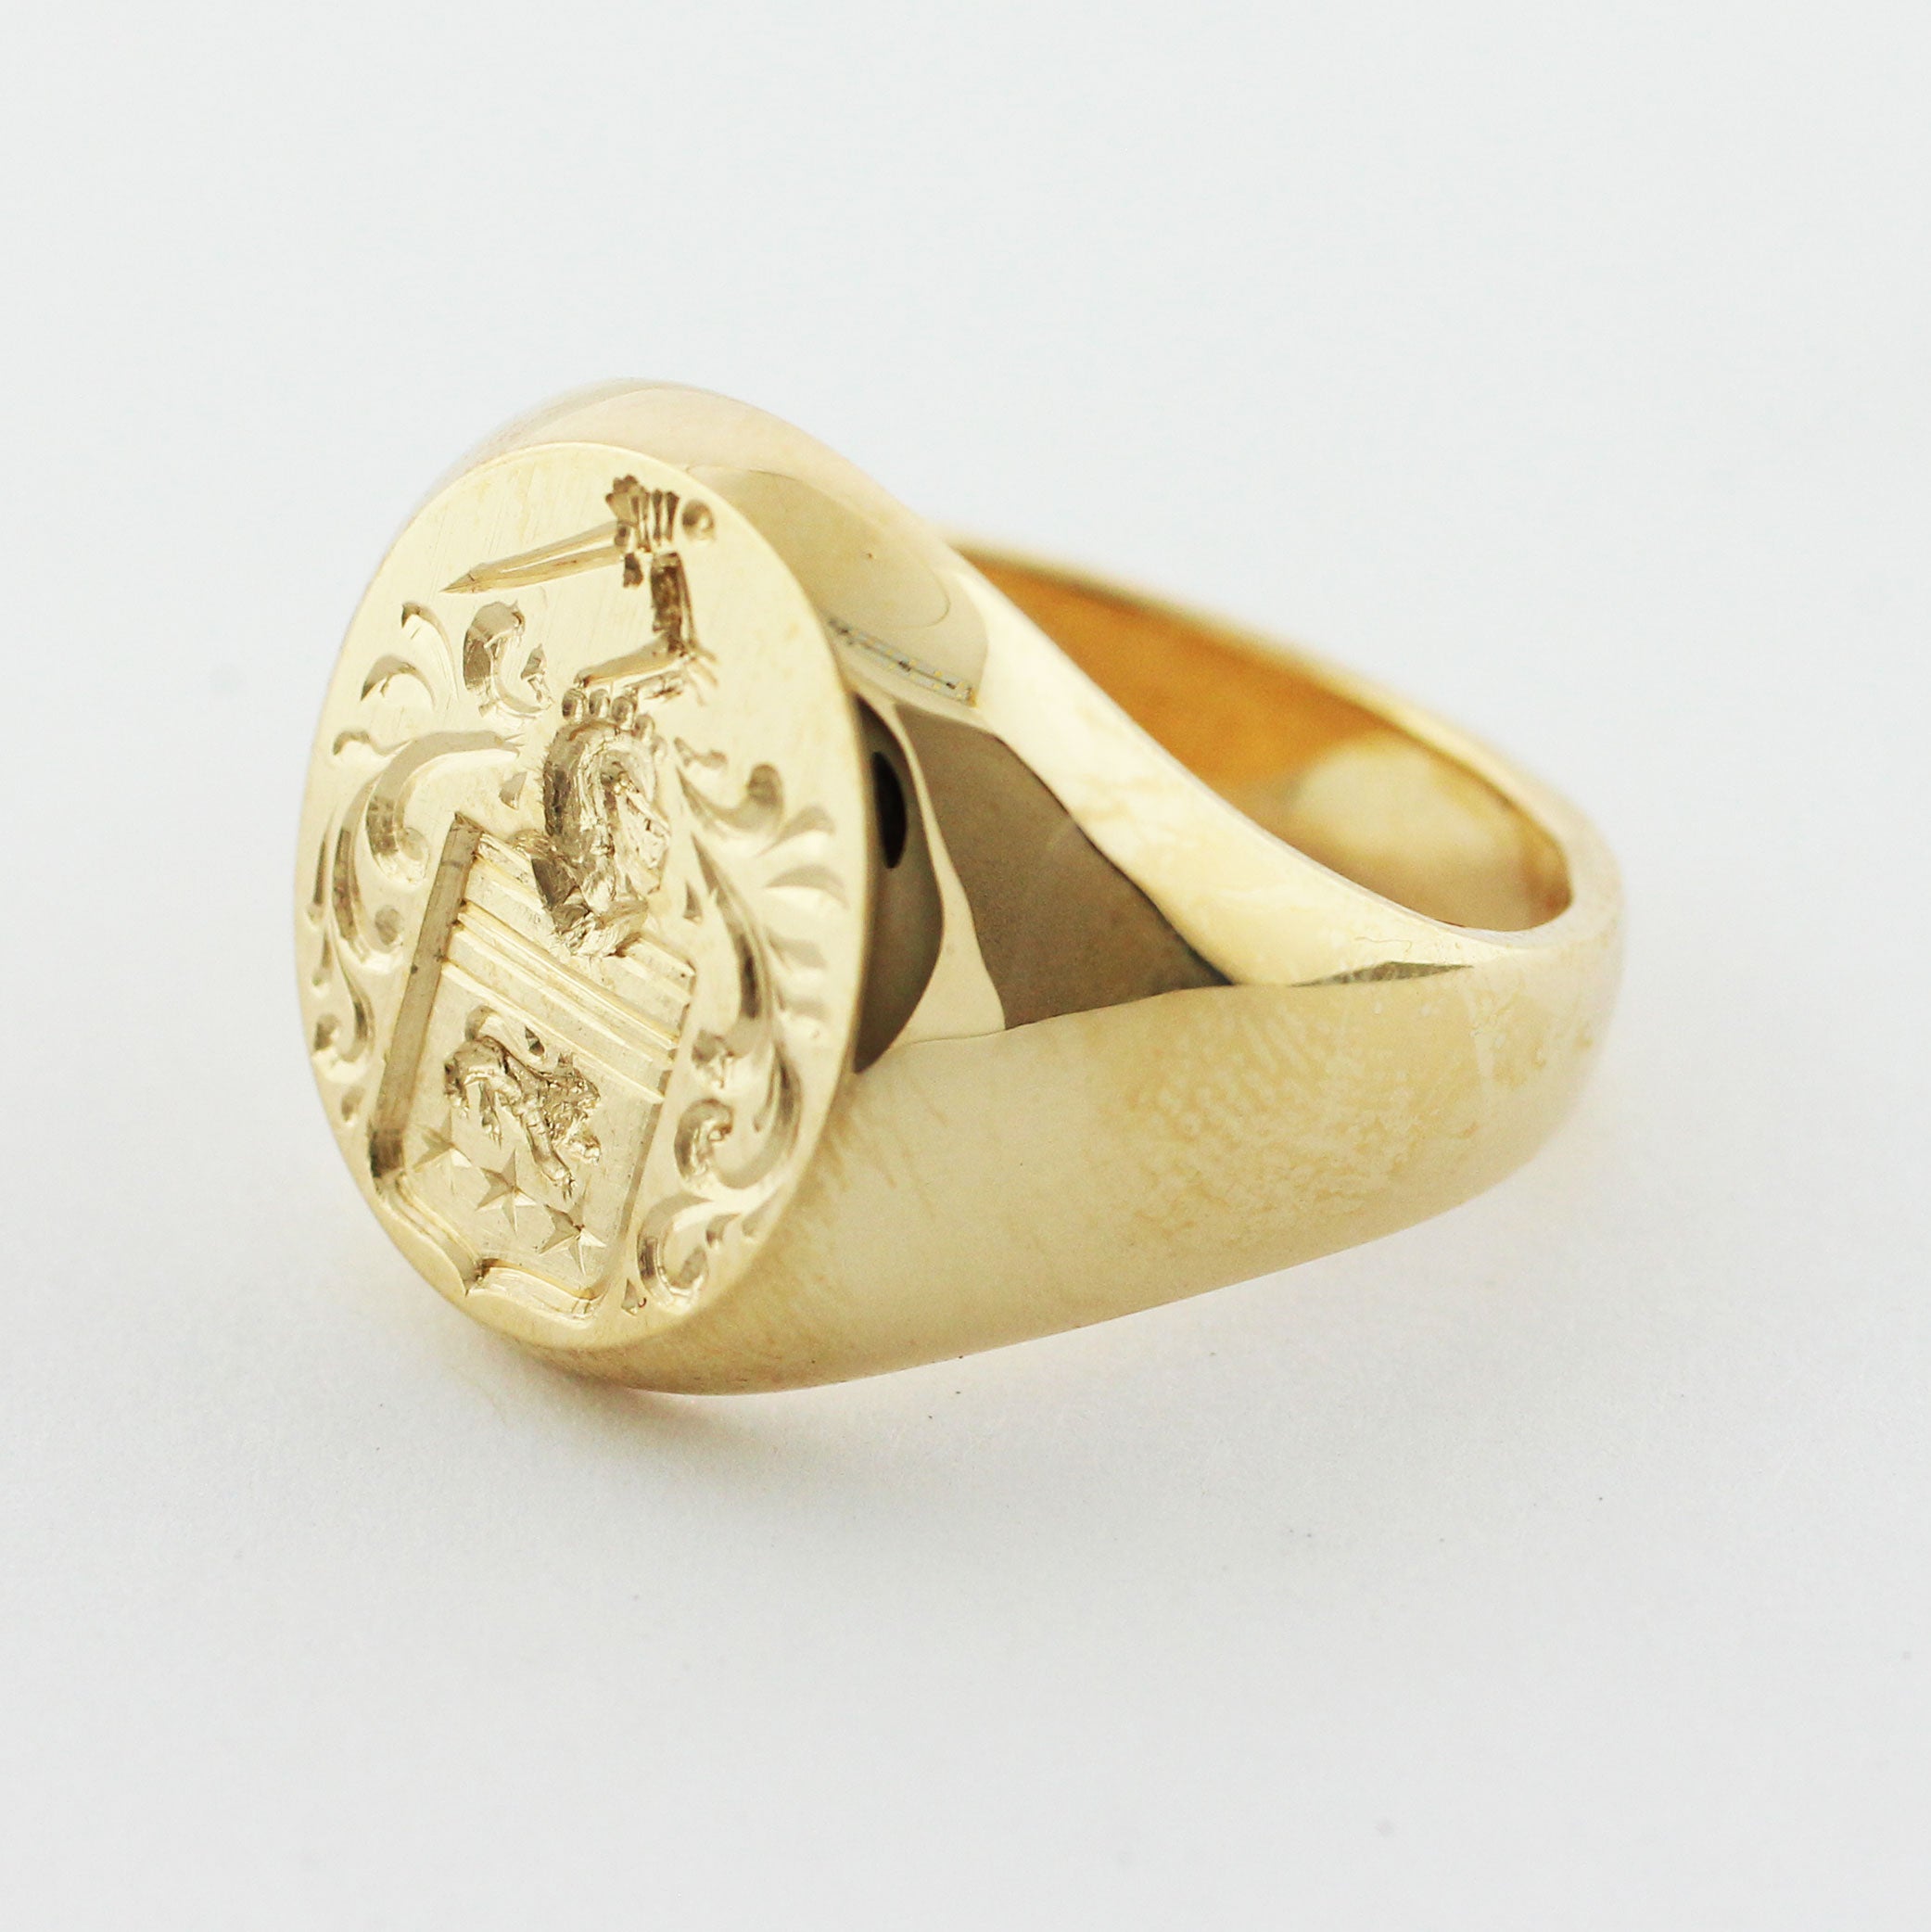 custom 14-karat yellow gold signet ring proudly displays a meticulously crafted intaglio family crest